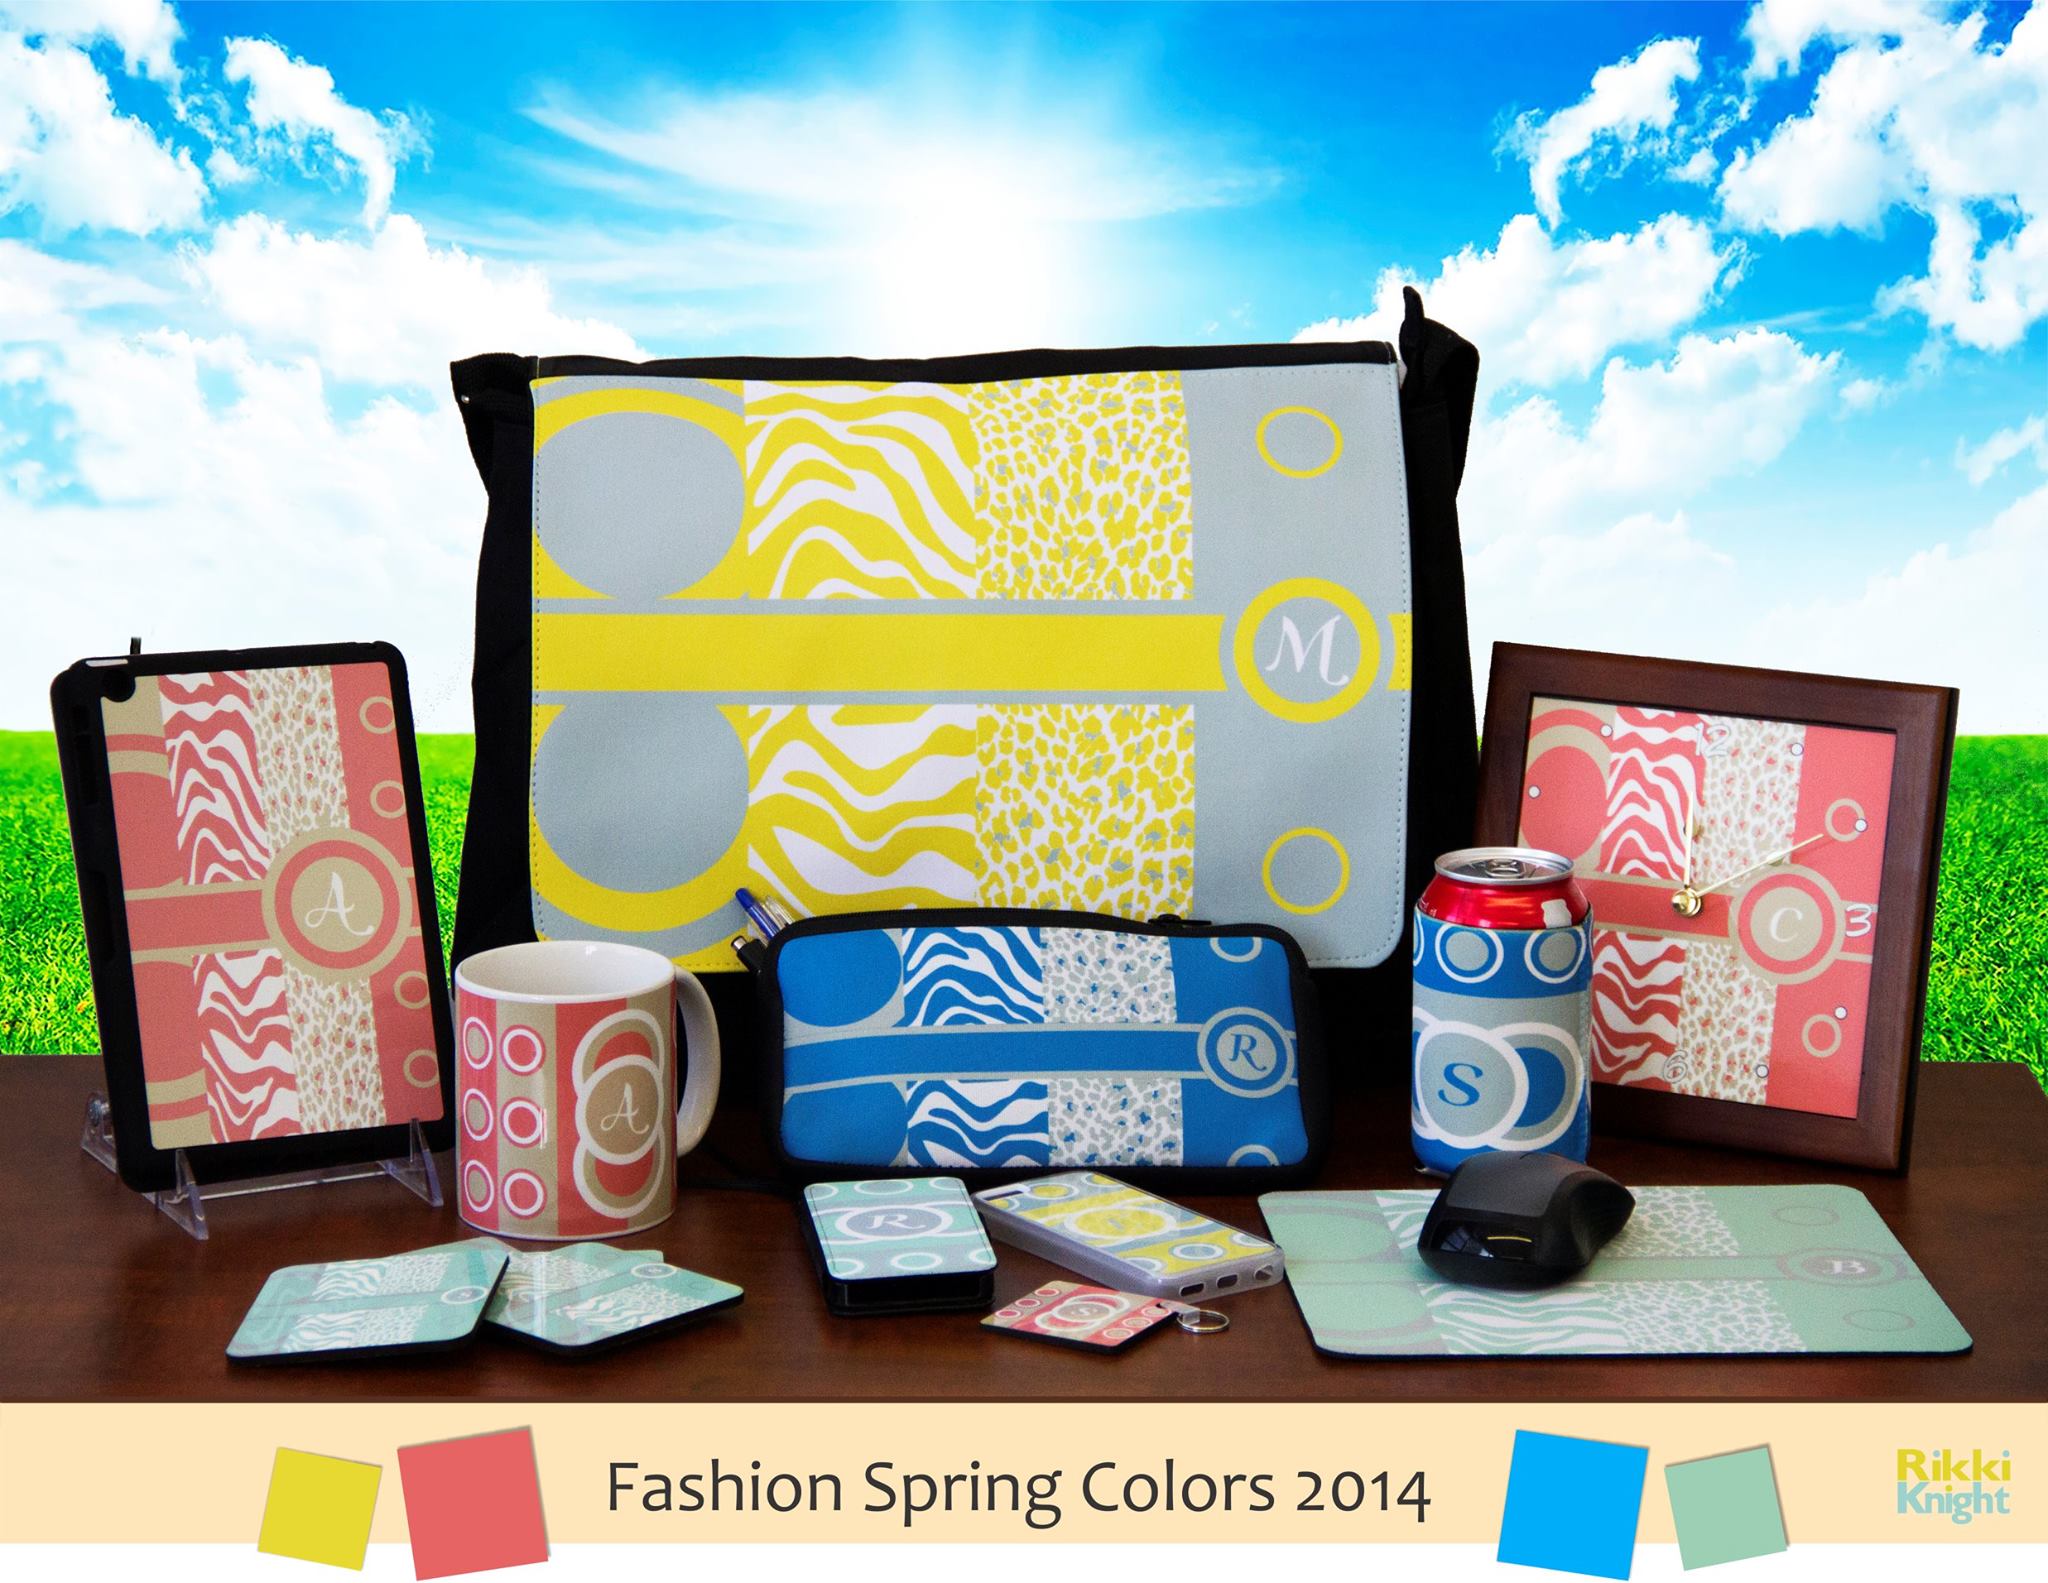 Spring Fashion made with sublimation printing